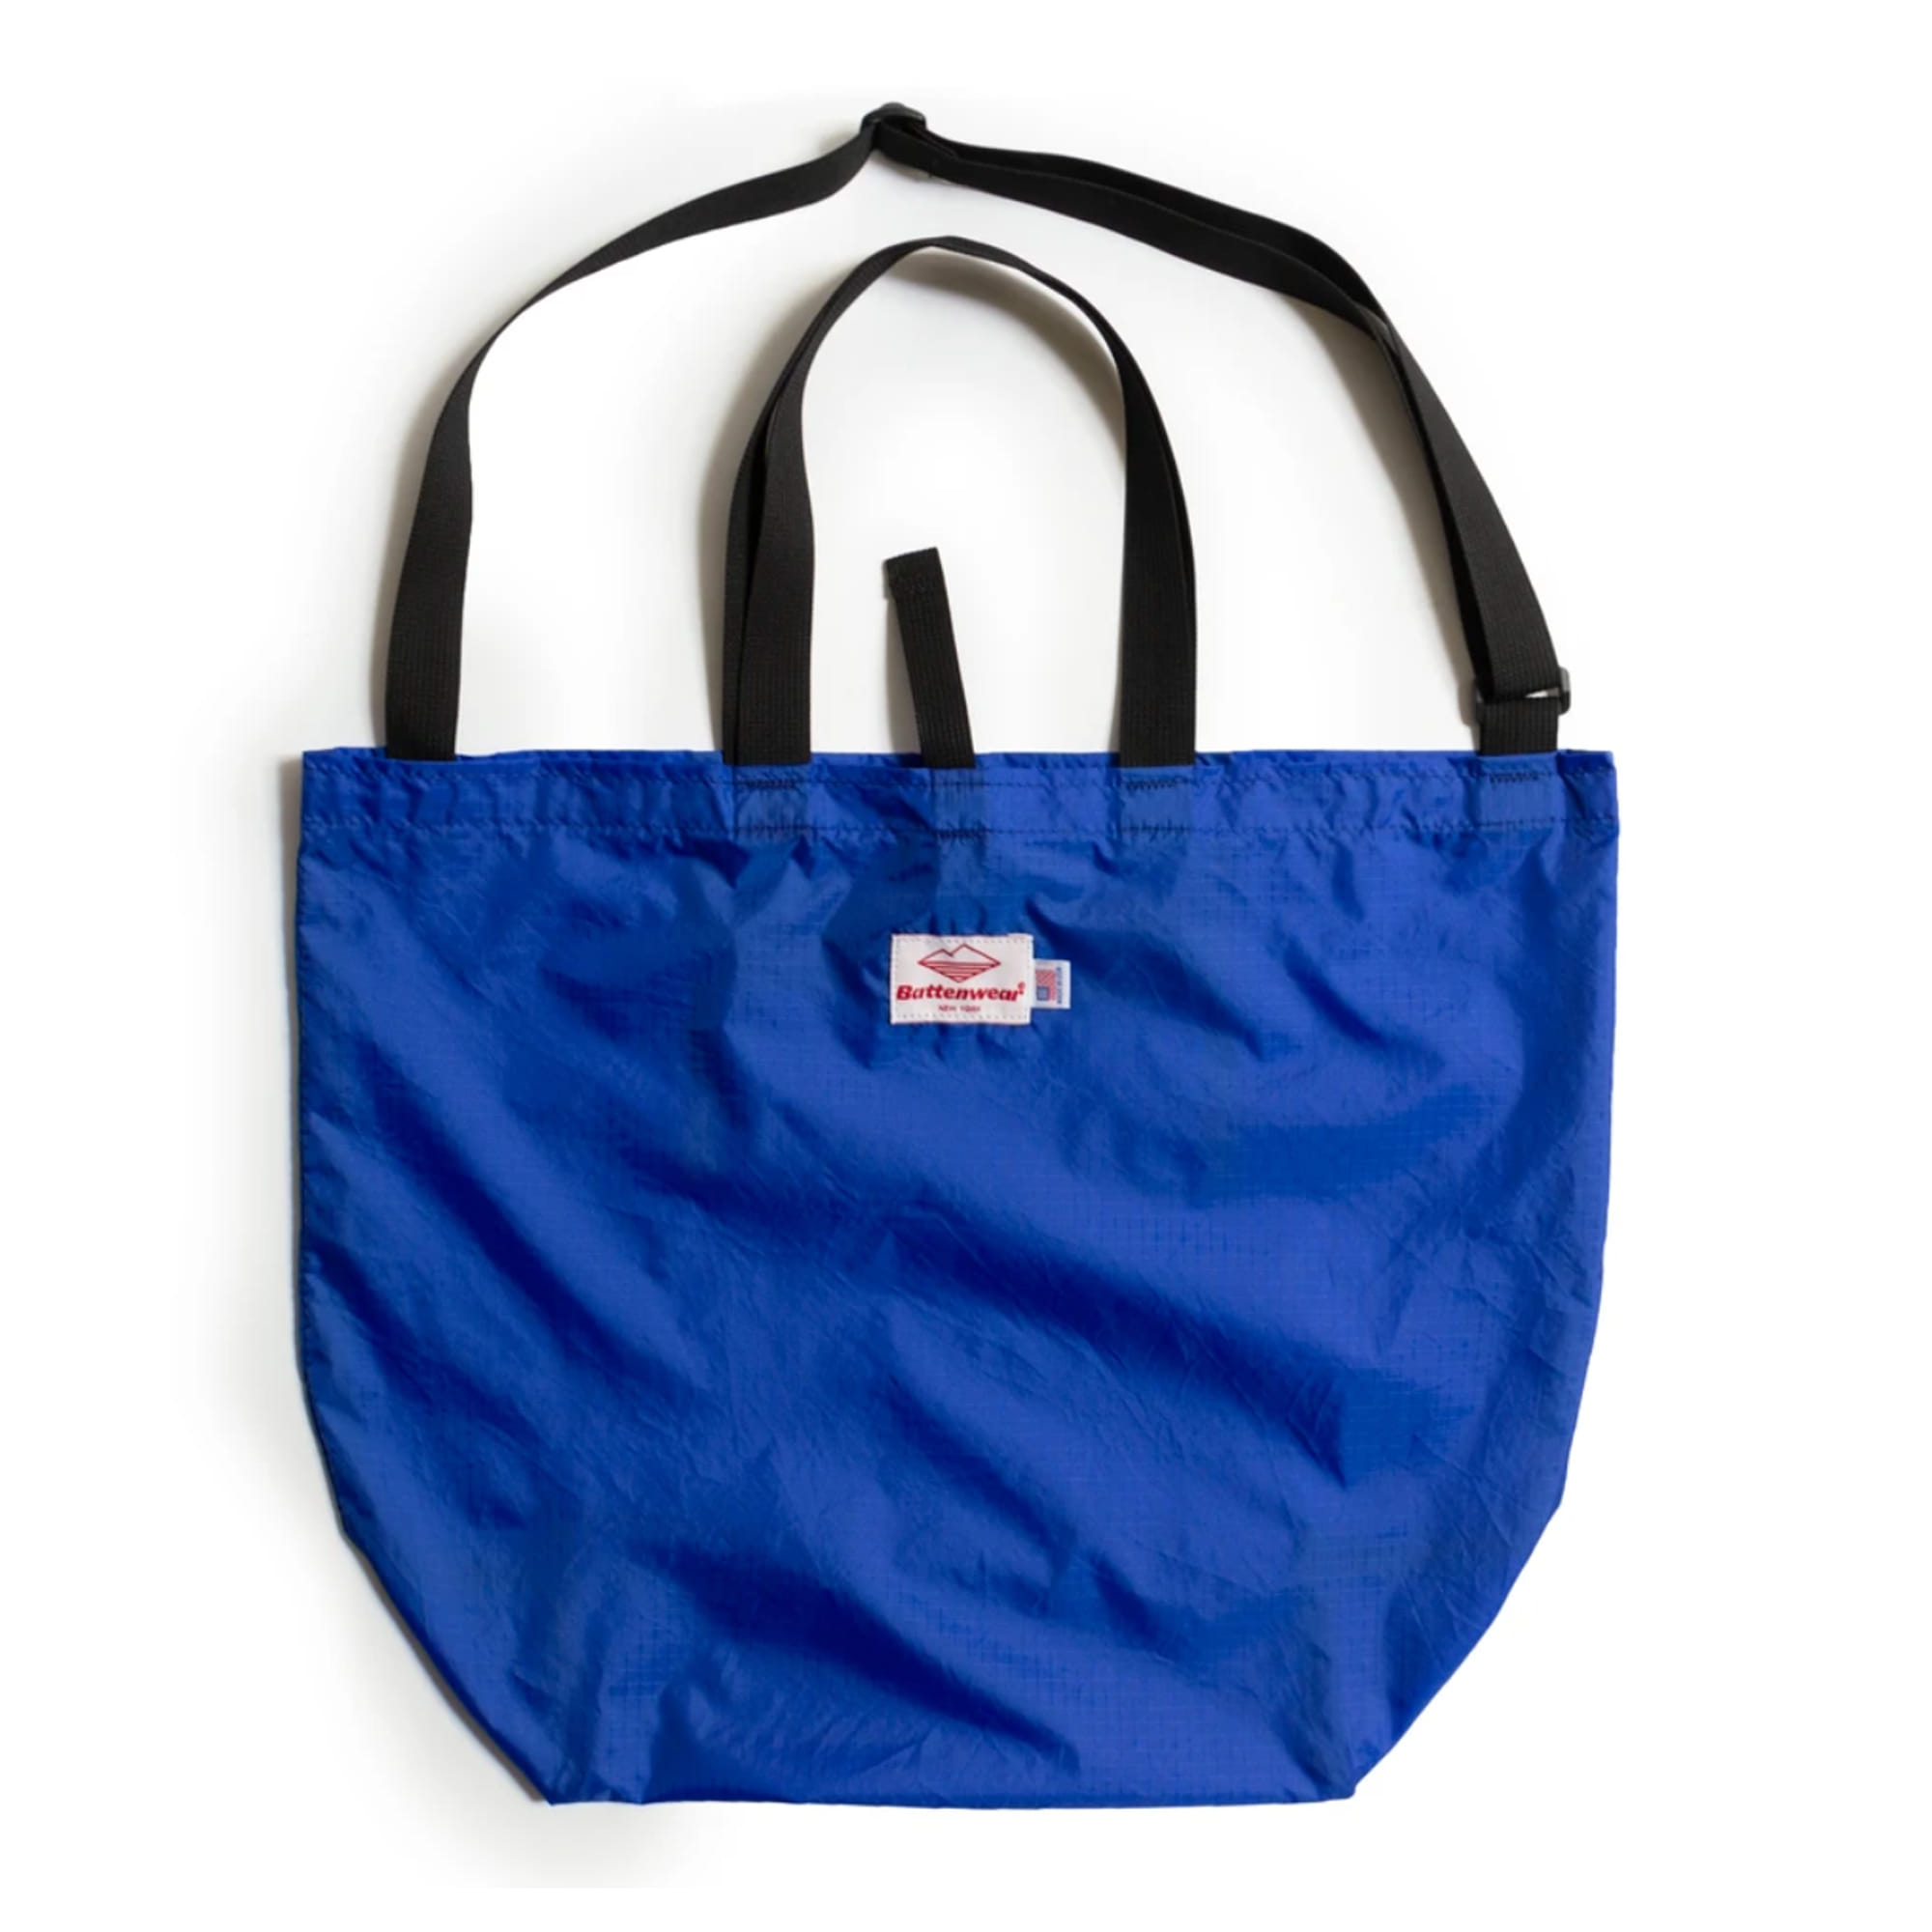 [Battenwear] PACKABLE TOTE (ROYAL BLUE)